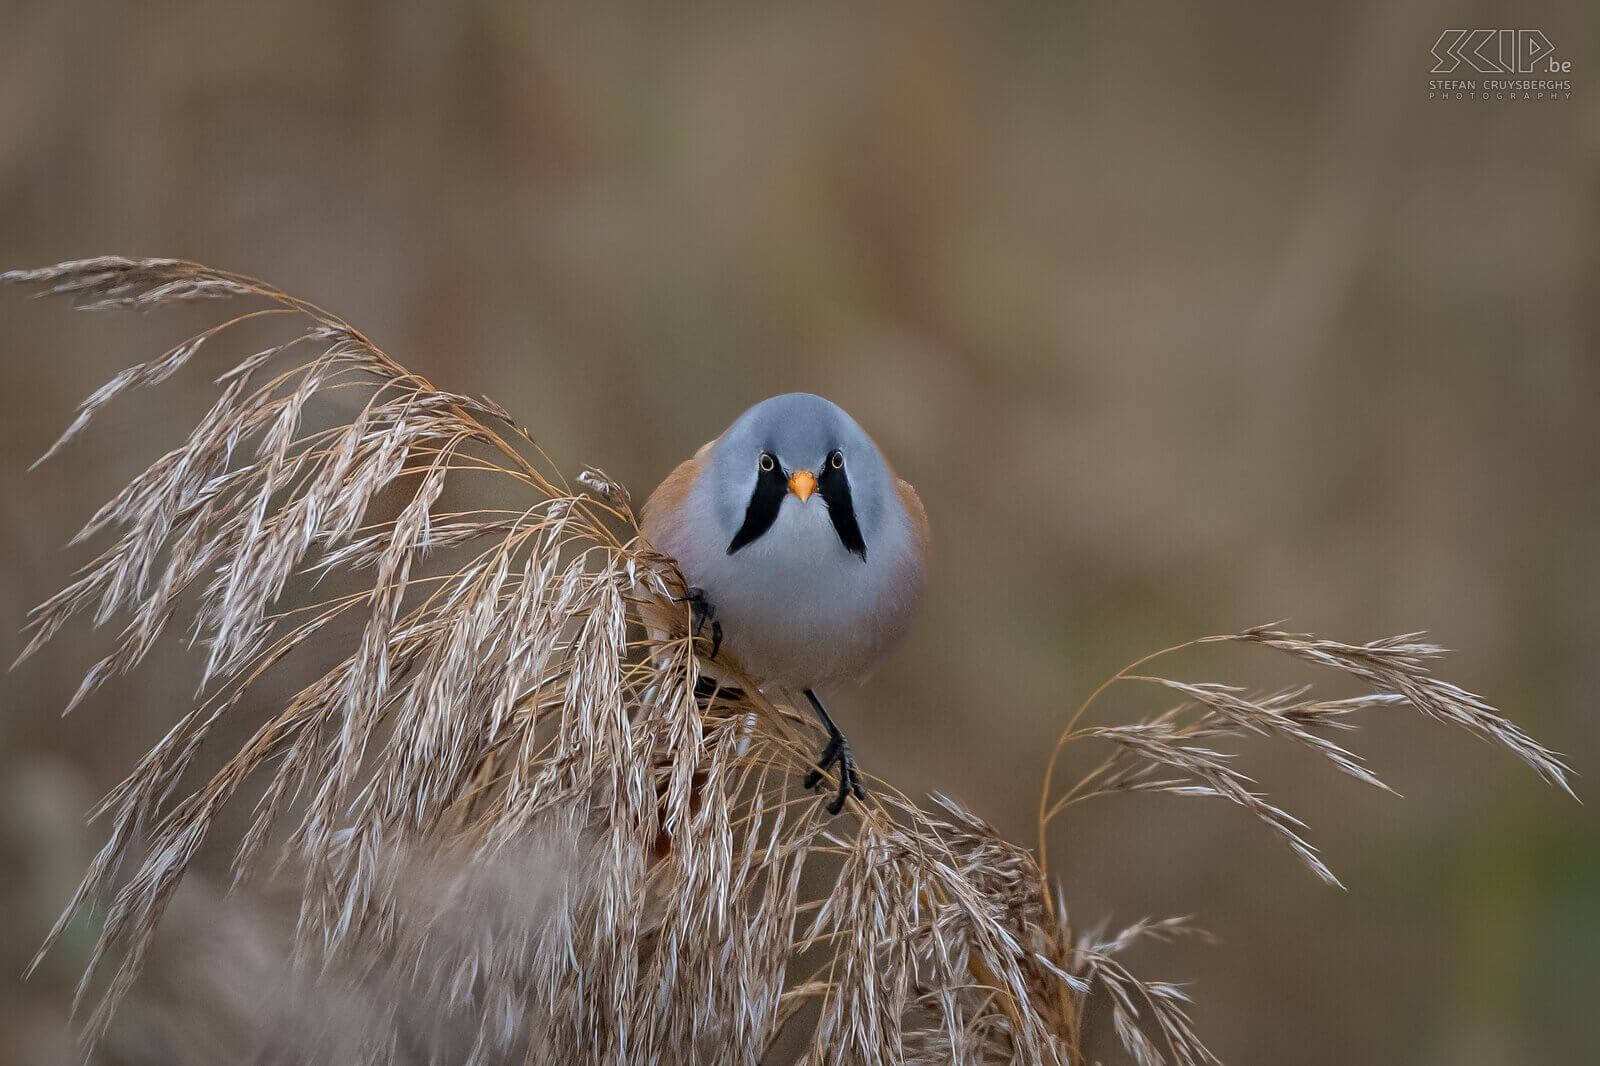 Bearded readlings The bearded reedling can only be found in reed fields, they are quite social and are usually seen in groups of up to several dozen birds. The adult male has characteristic black 'moustache'. Stefan Cruysberghs